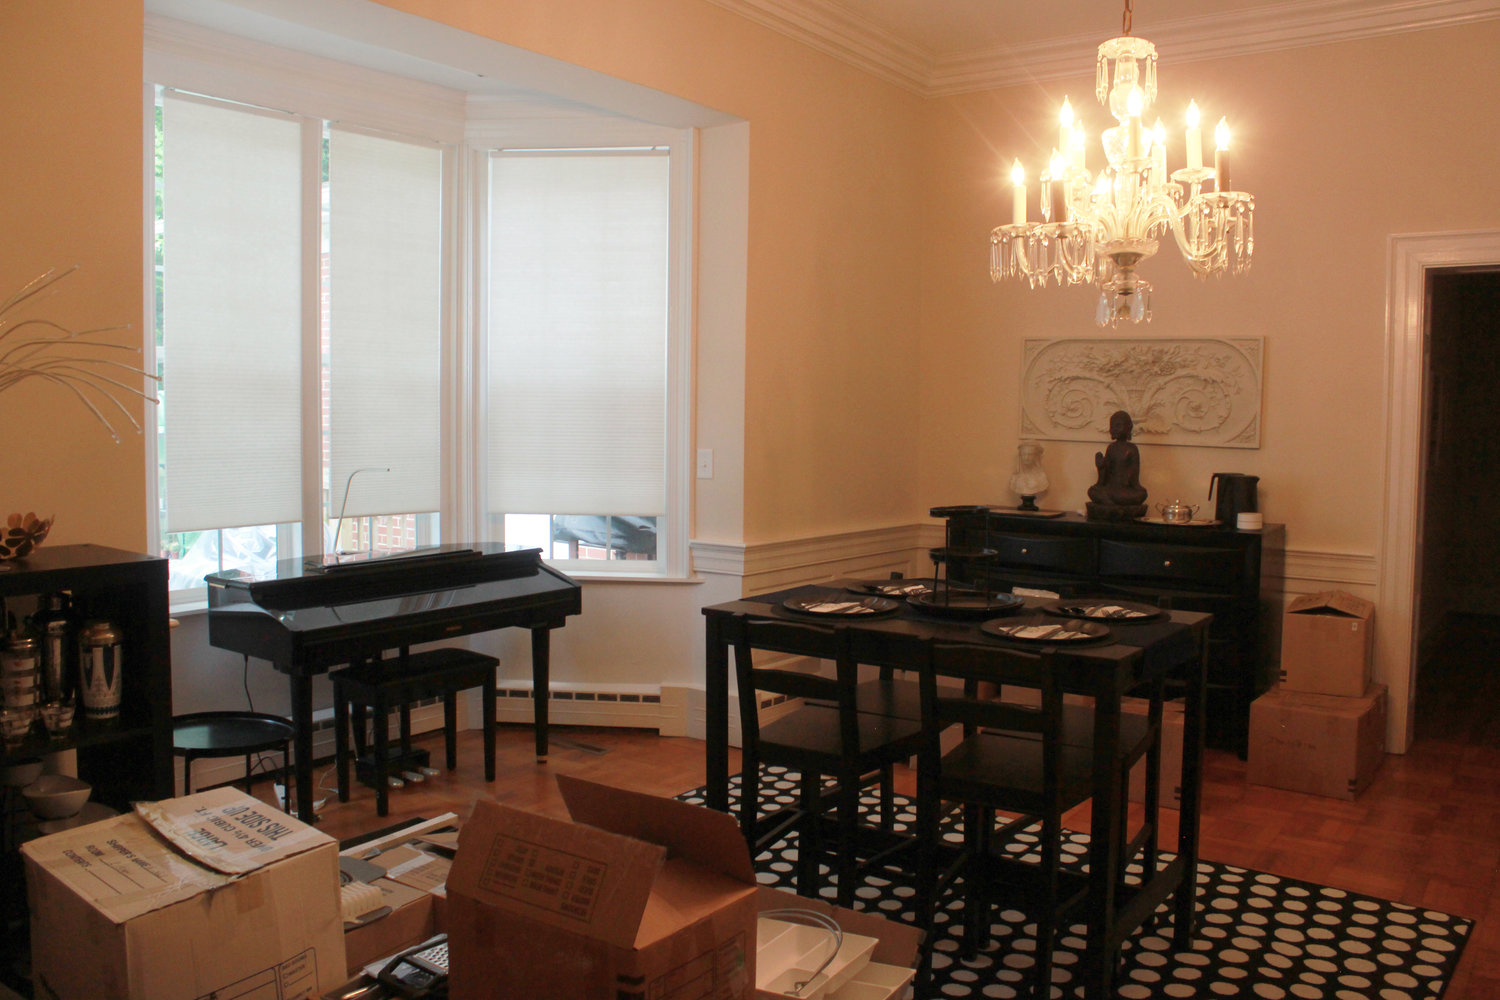 Boxes lay unpacked in he dining room of the house formerly owned by actress Frances Bavier in Siler City, which is now being rennovated by current owner Kathy Nail.